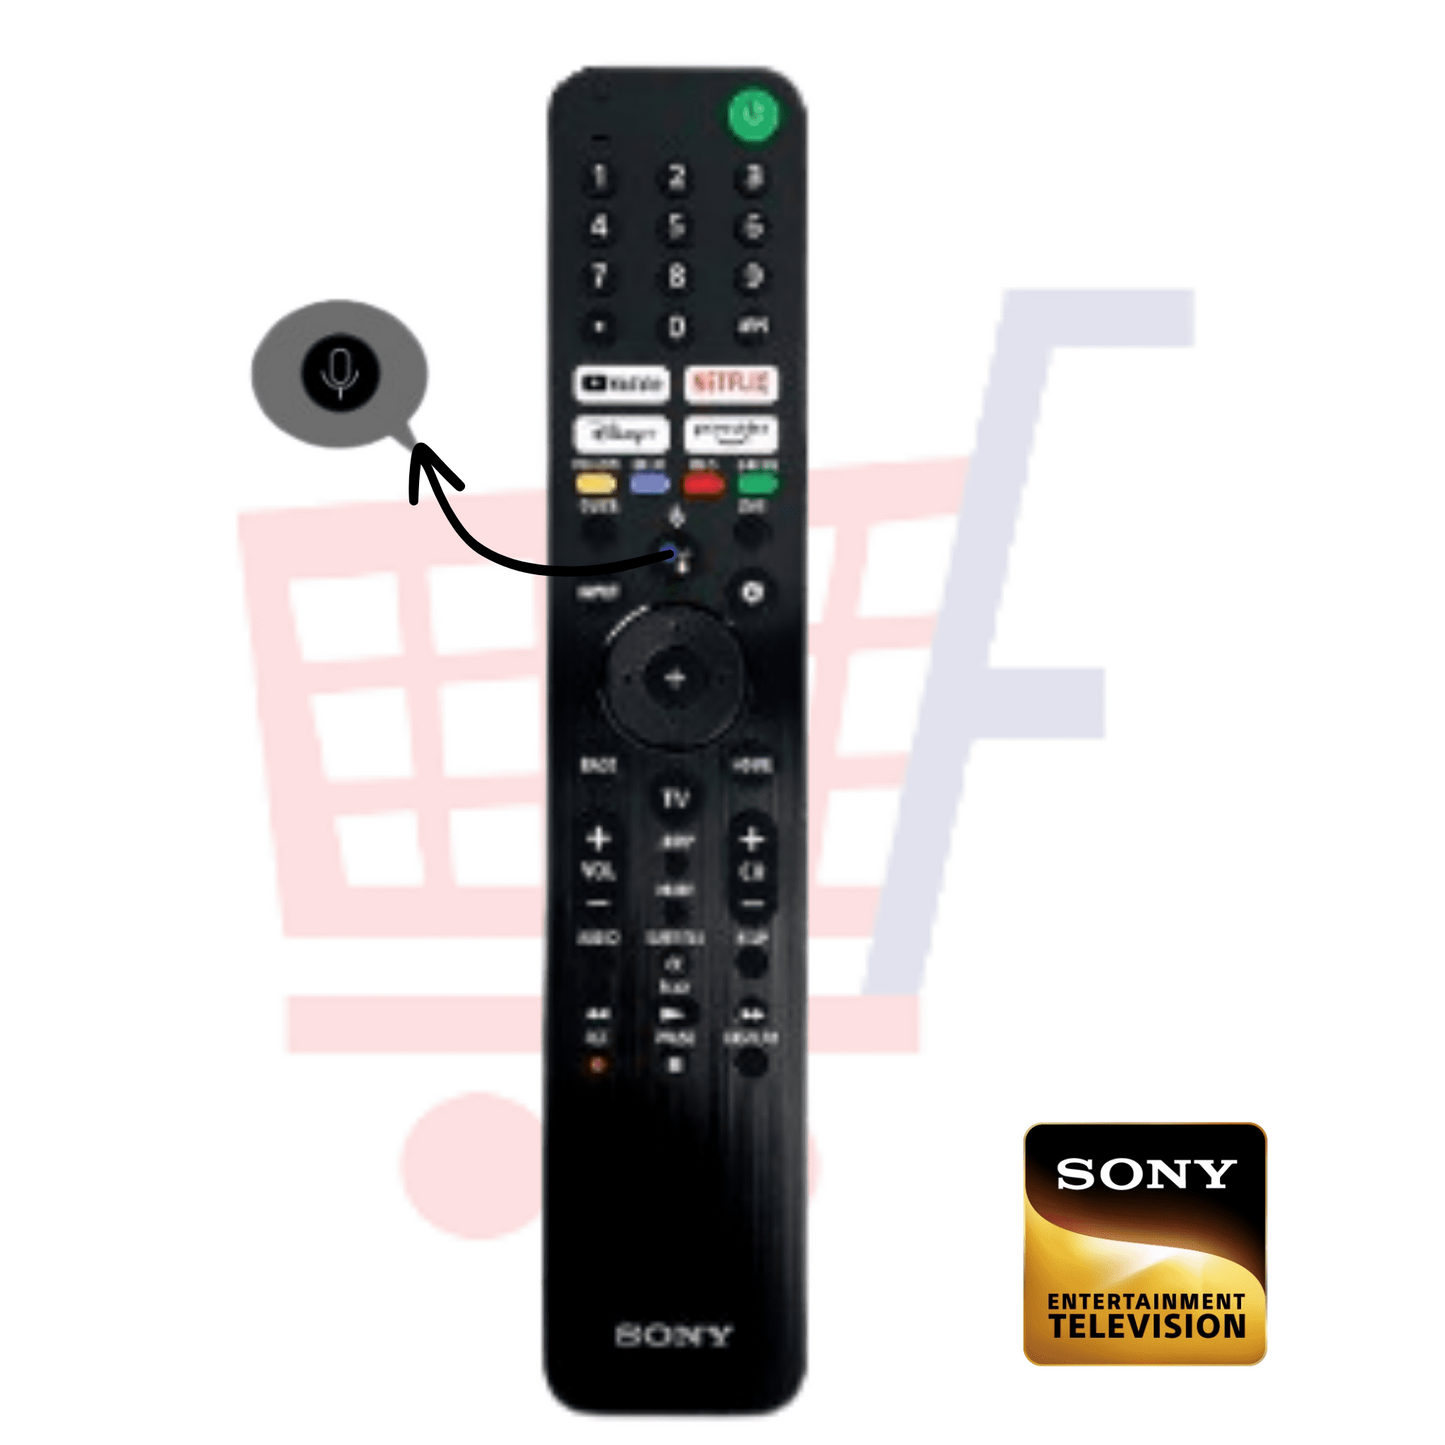 Original Sony Smart TV remote control with Googleplay  and Netflix and google voice